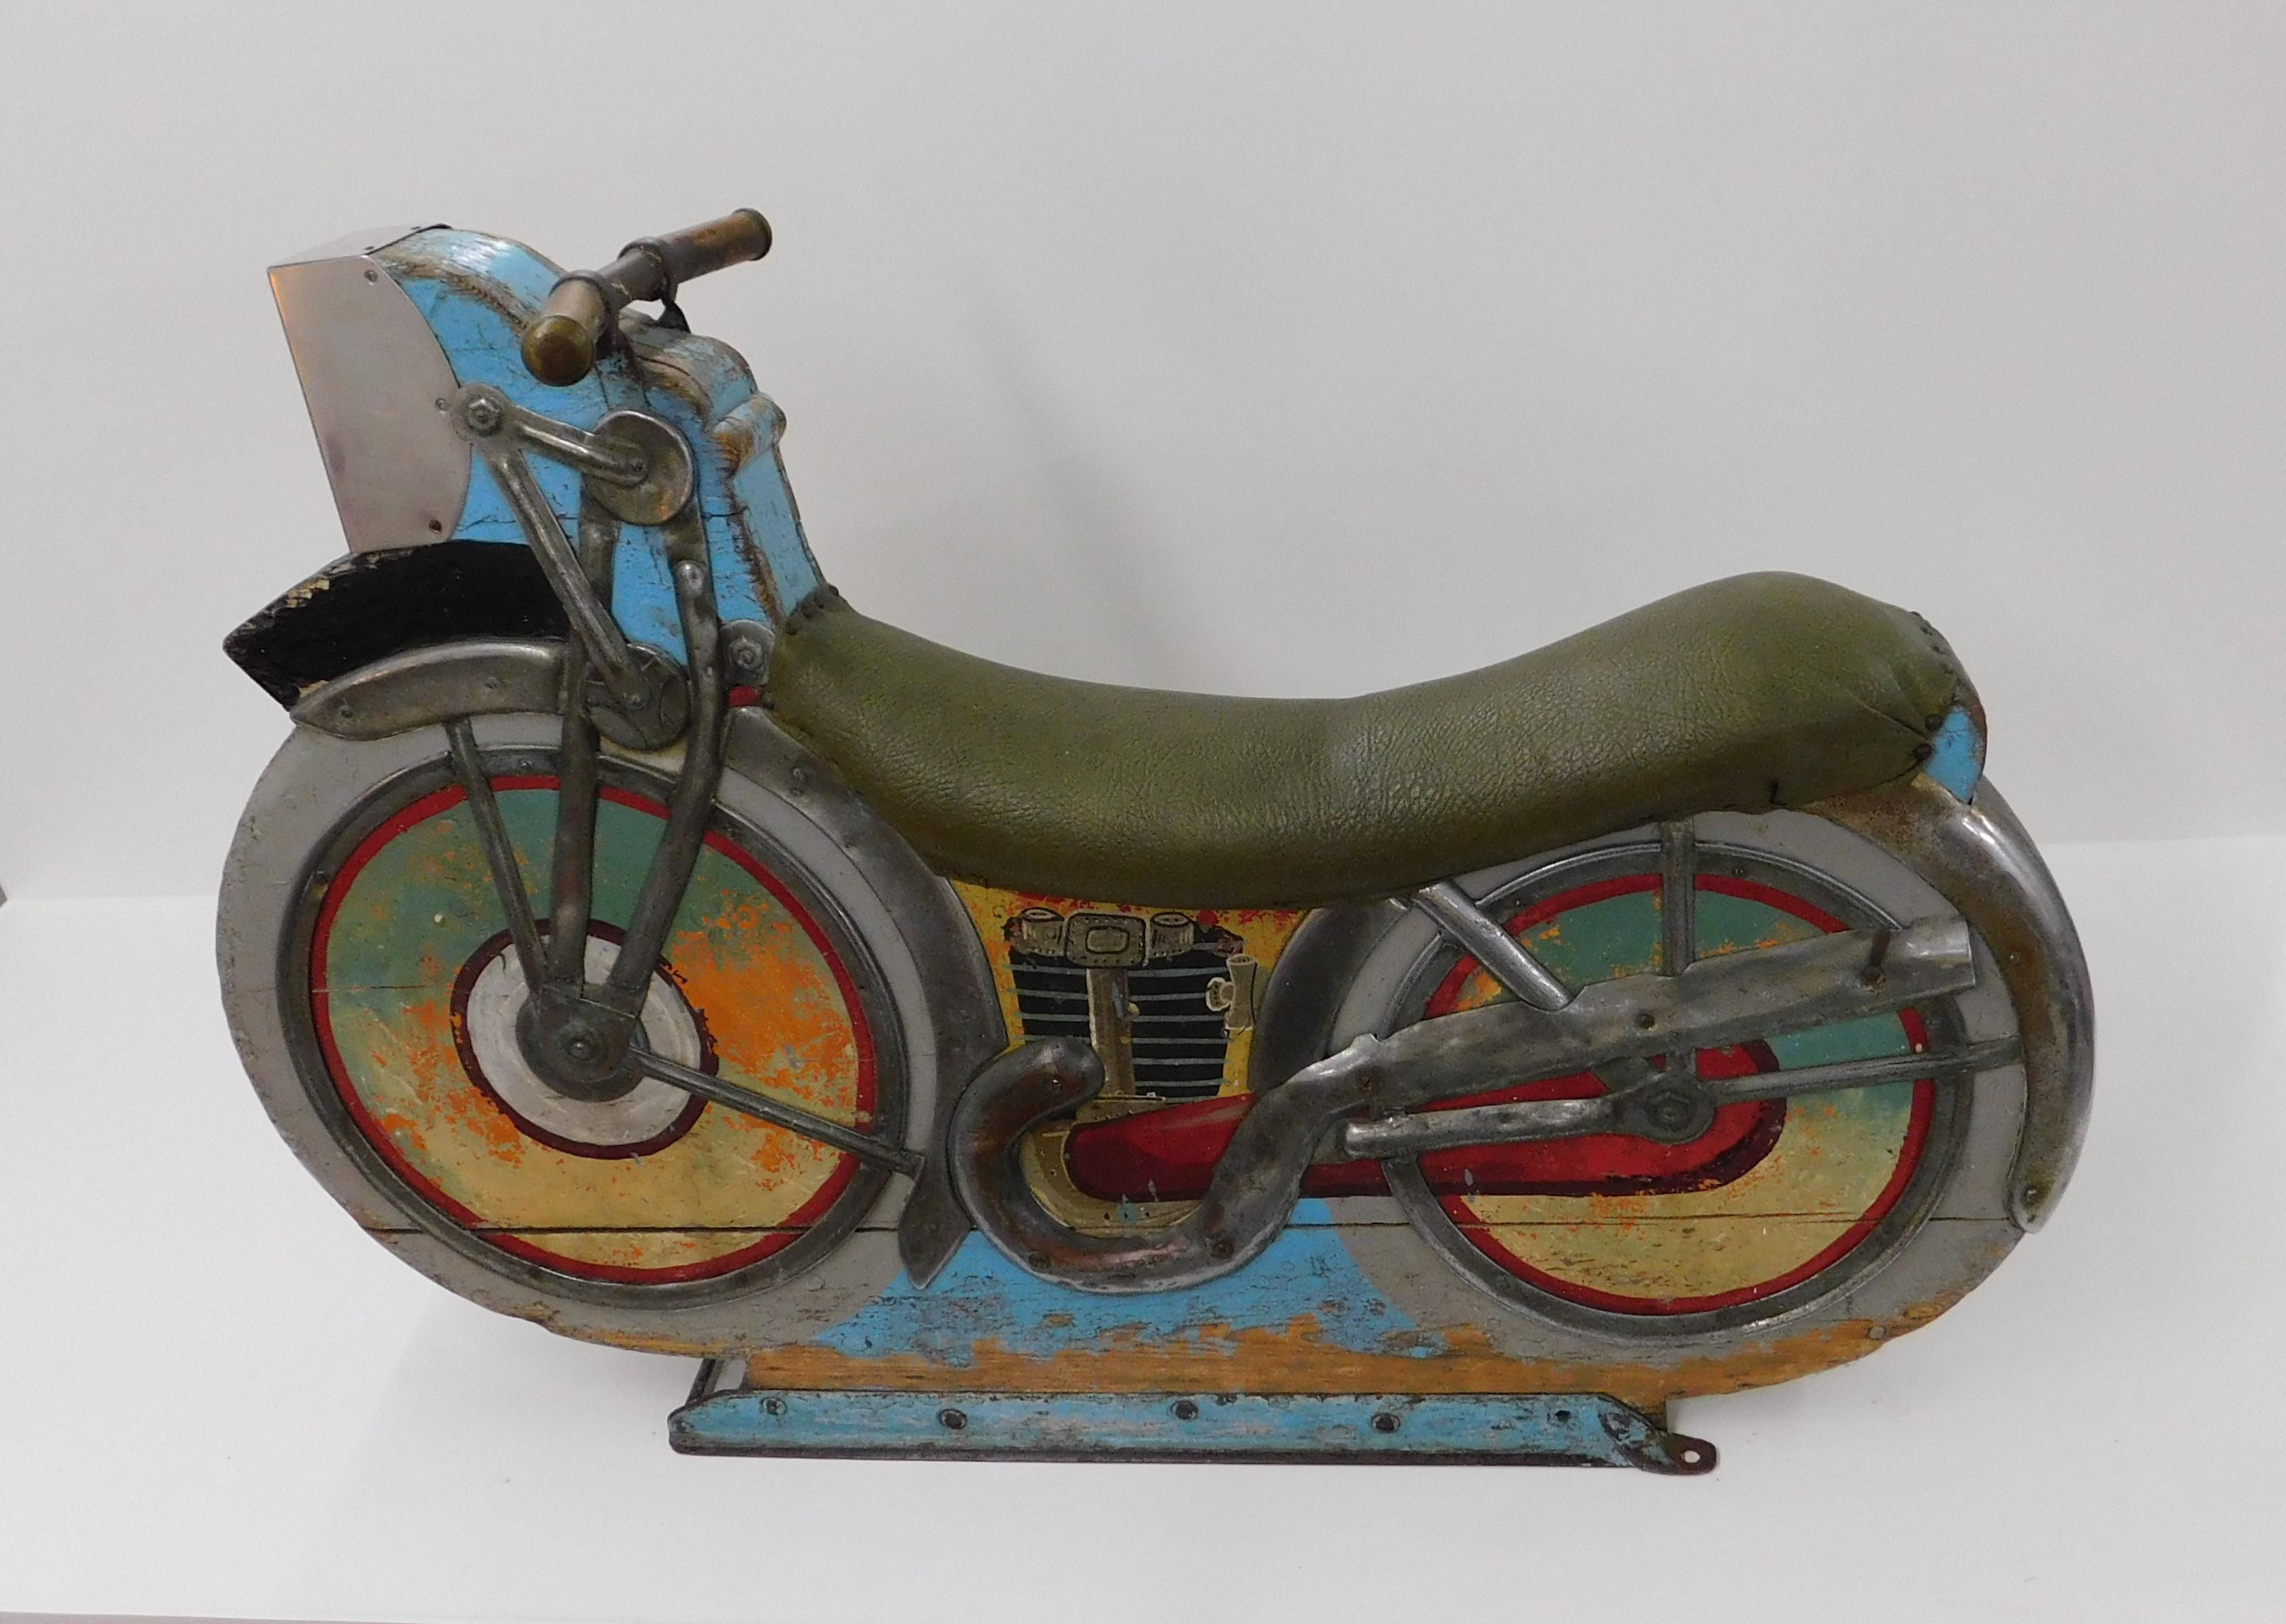 This 1930s-1940s antique midway amusement park wooden motorcycle ride is one of the earliest produced for carousels and merry-go-rounds and has a wonderfully aged patina. Two-sided, original paint, padded seat, steel/chrome exhaust pipes and